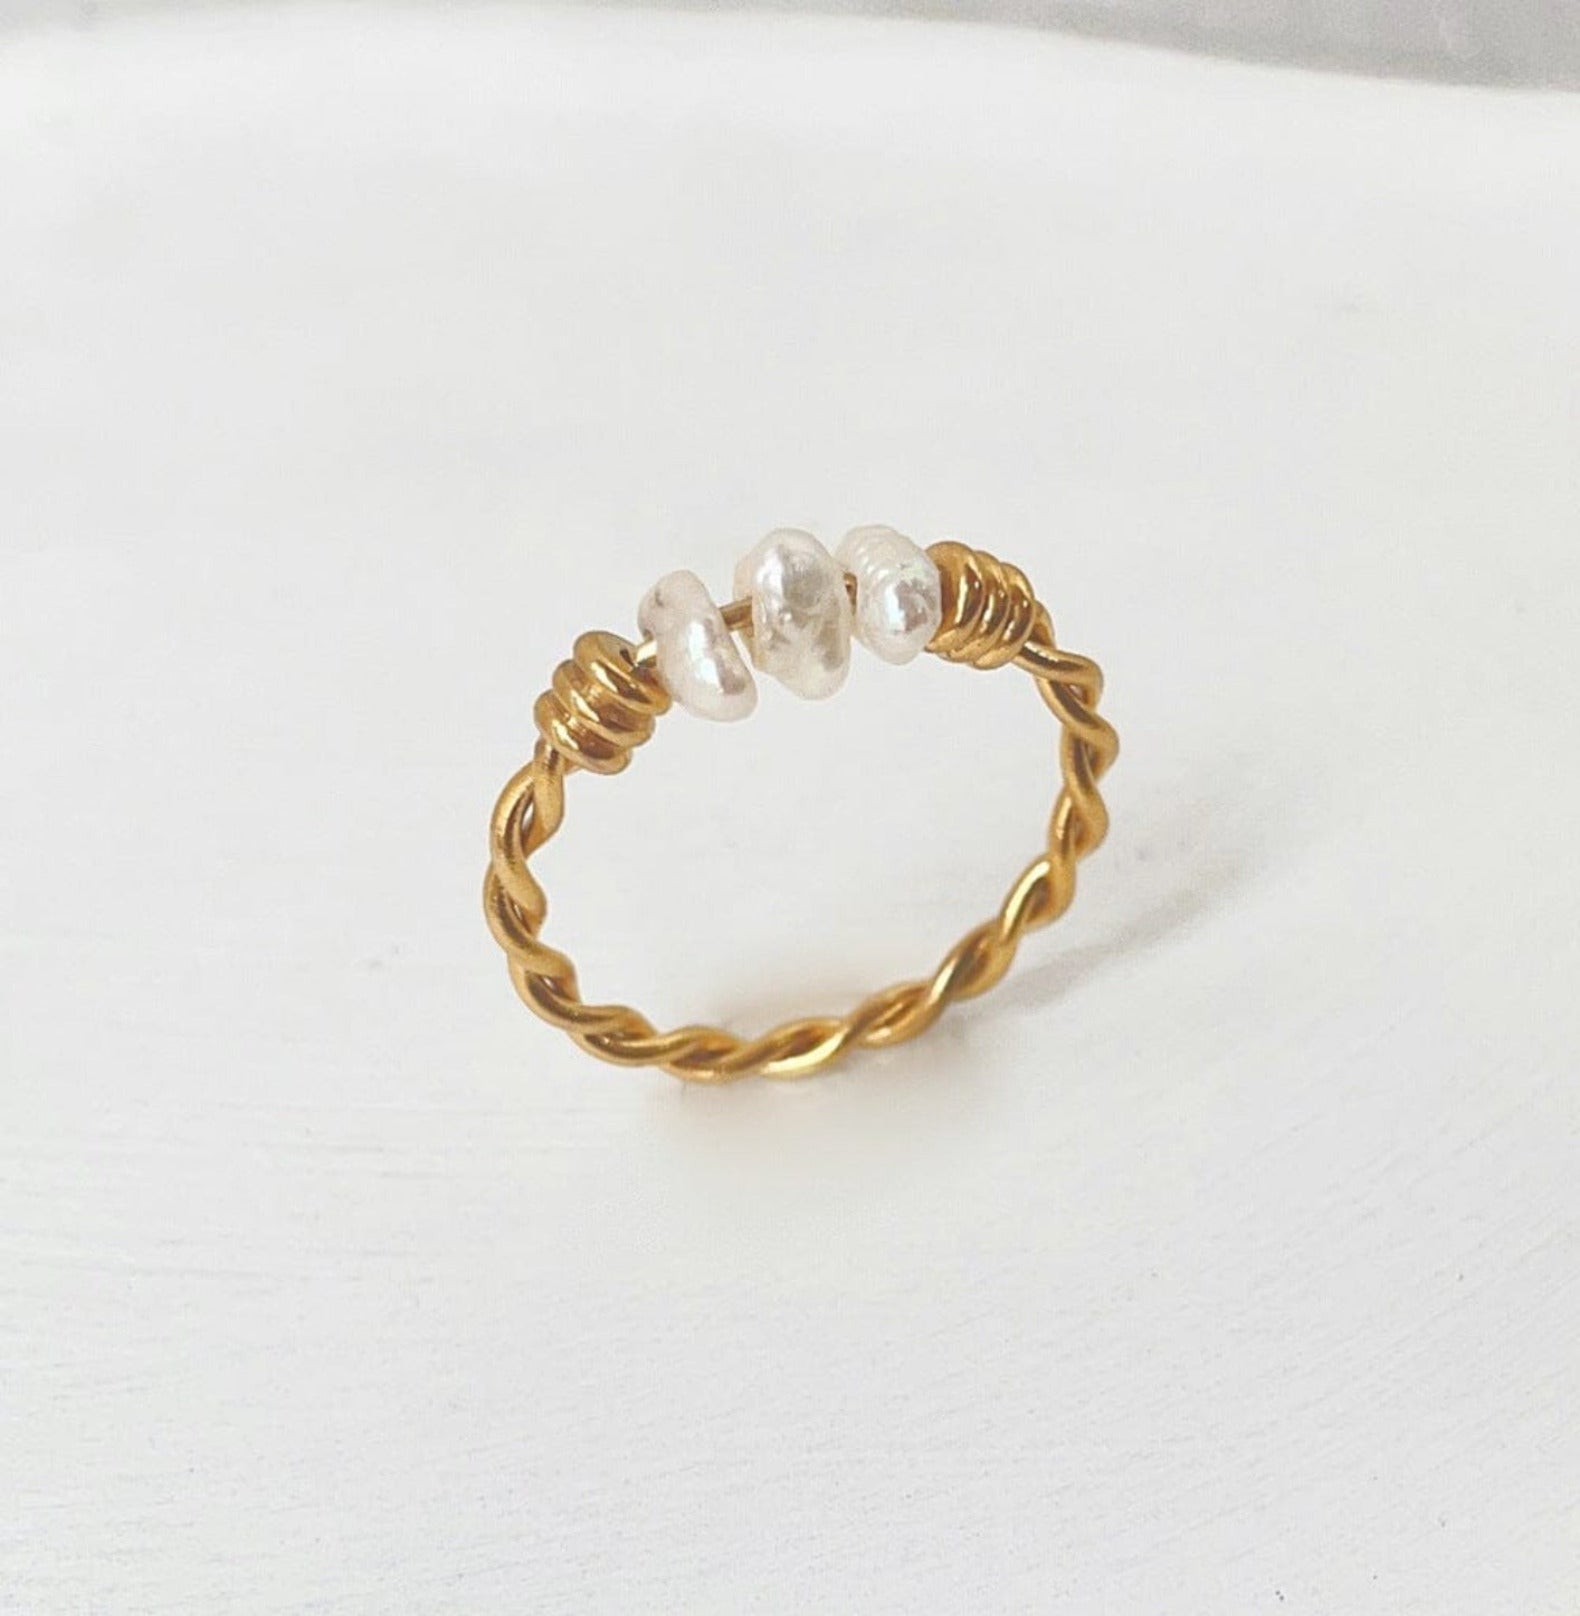 TWIST RING ring Yubama Jewelry Online Store - The Elegant Designs of Gold and Silver ! 